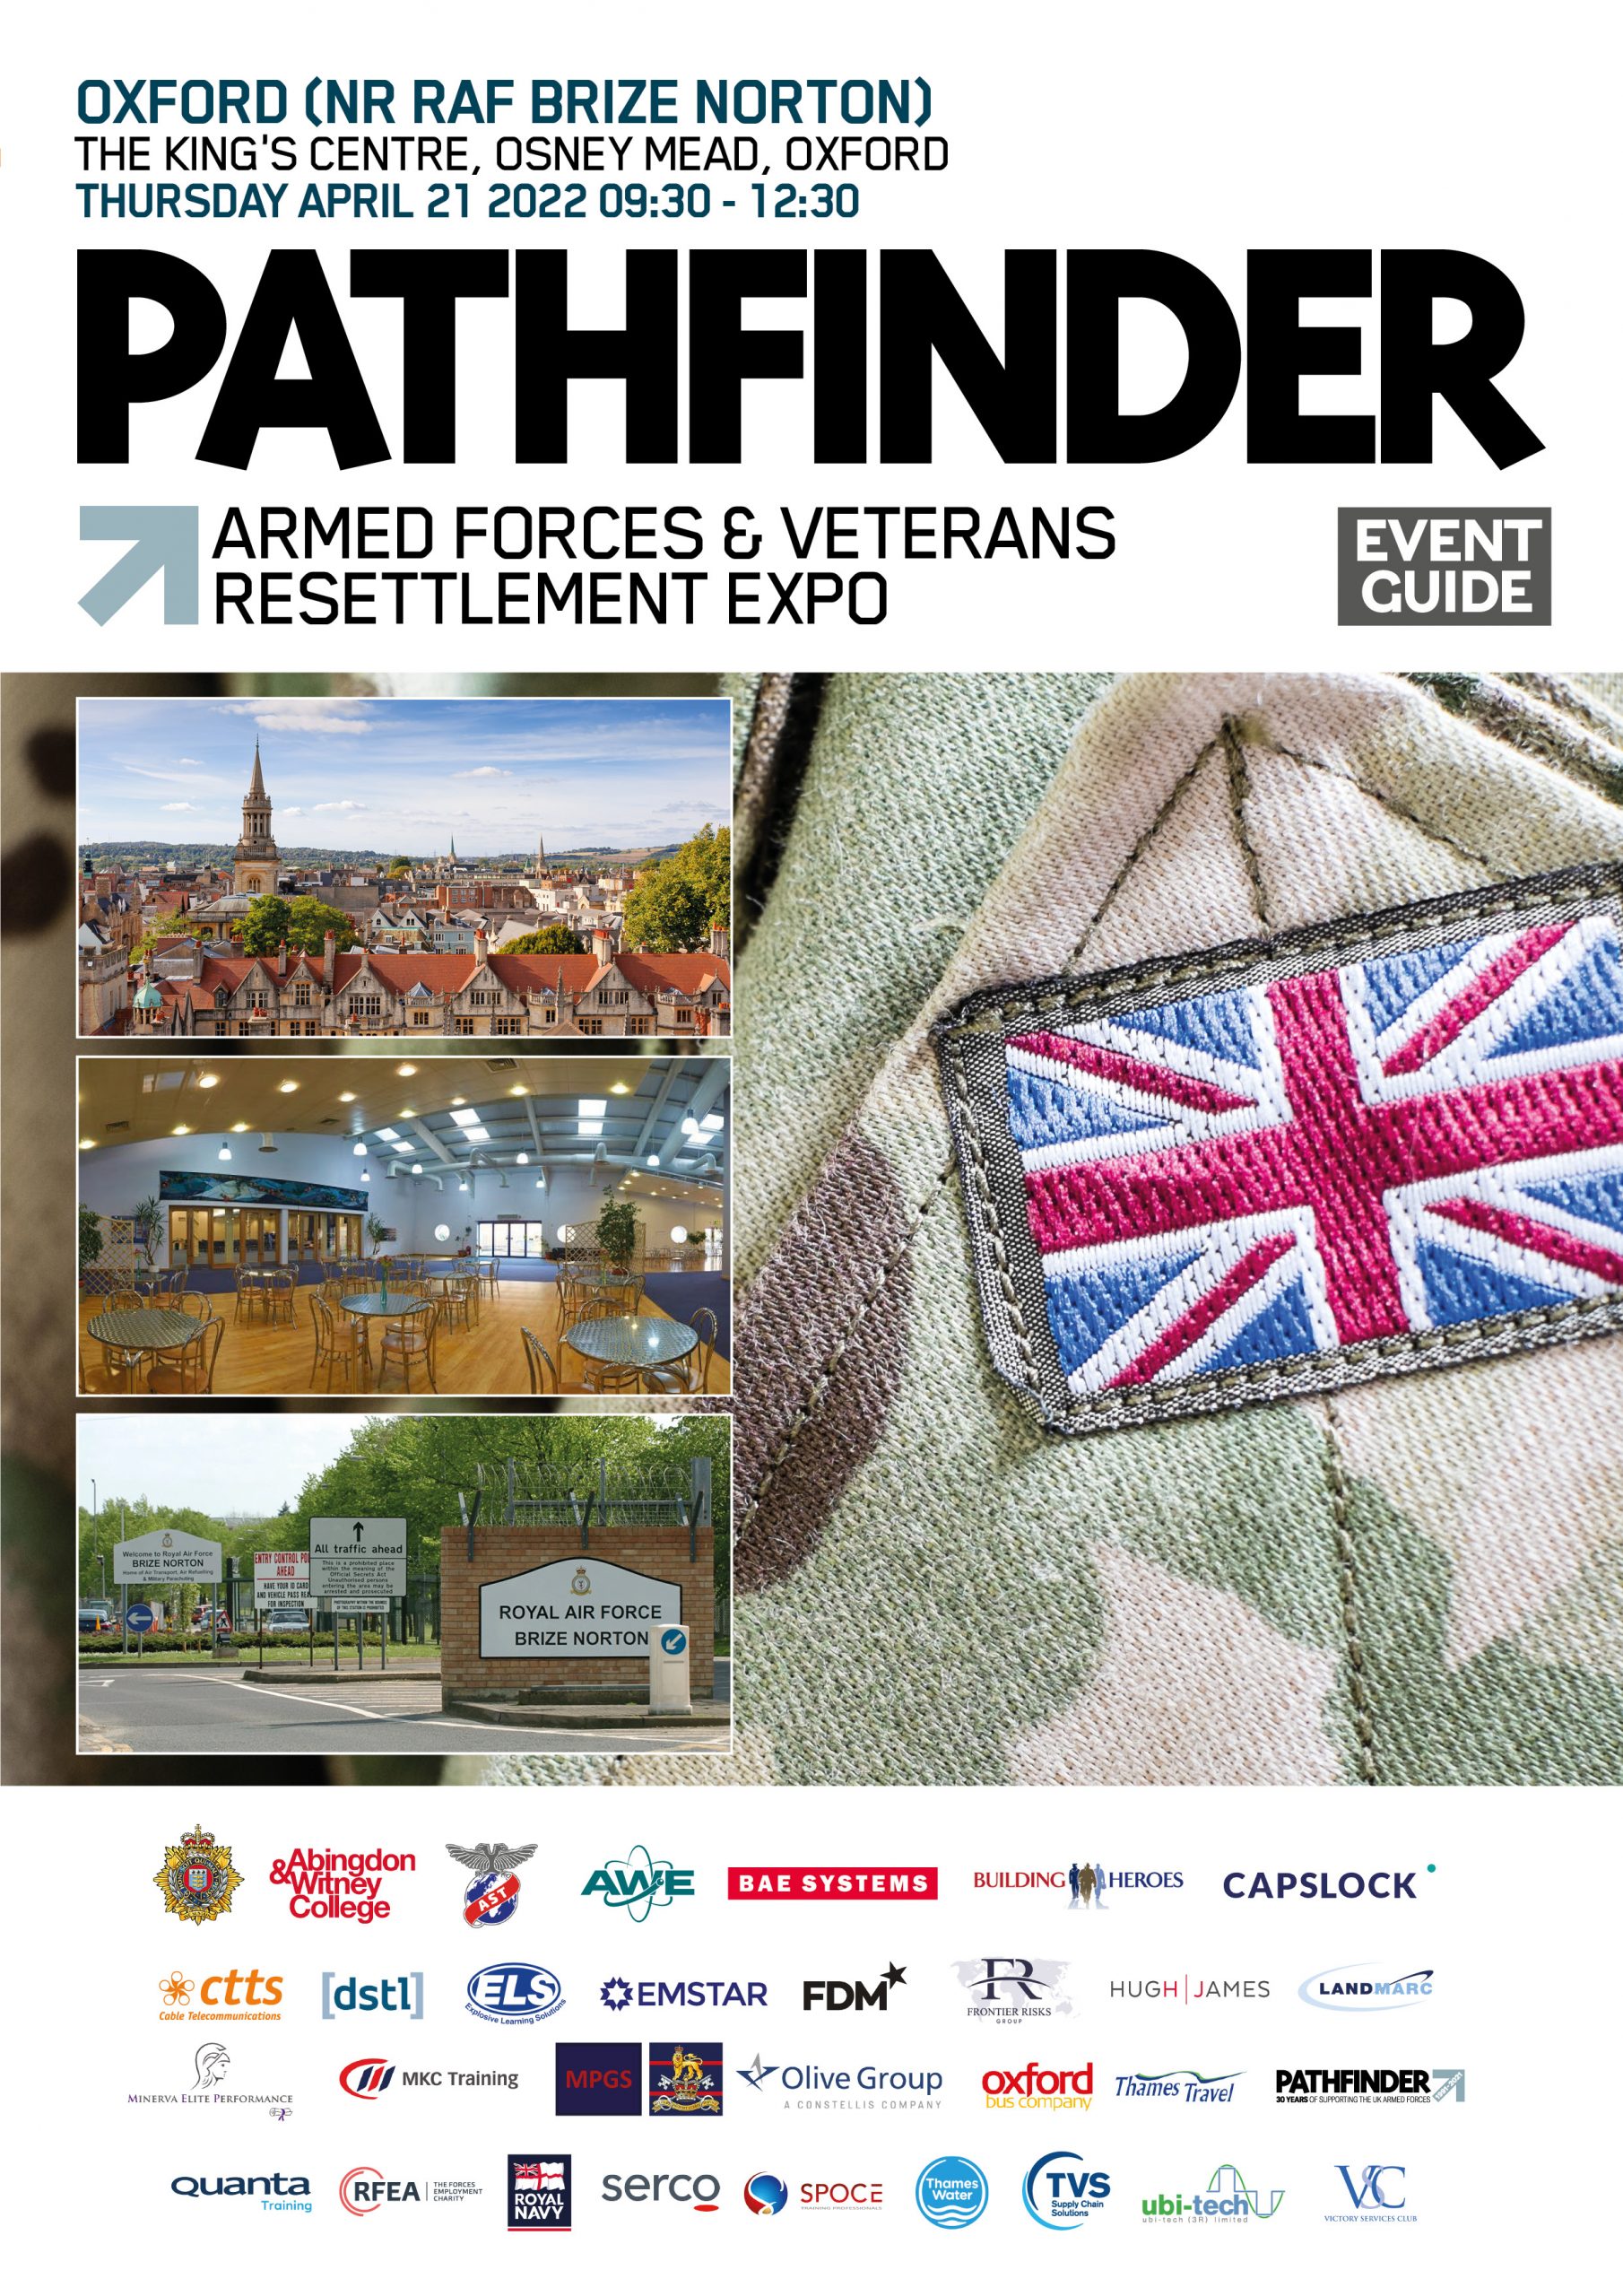 Armed Forces & Veterans Resettlement Expo Oxford – Your Questions Answered